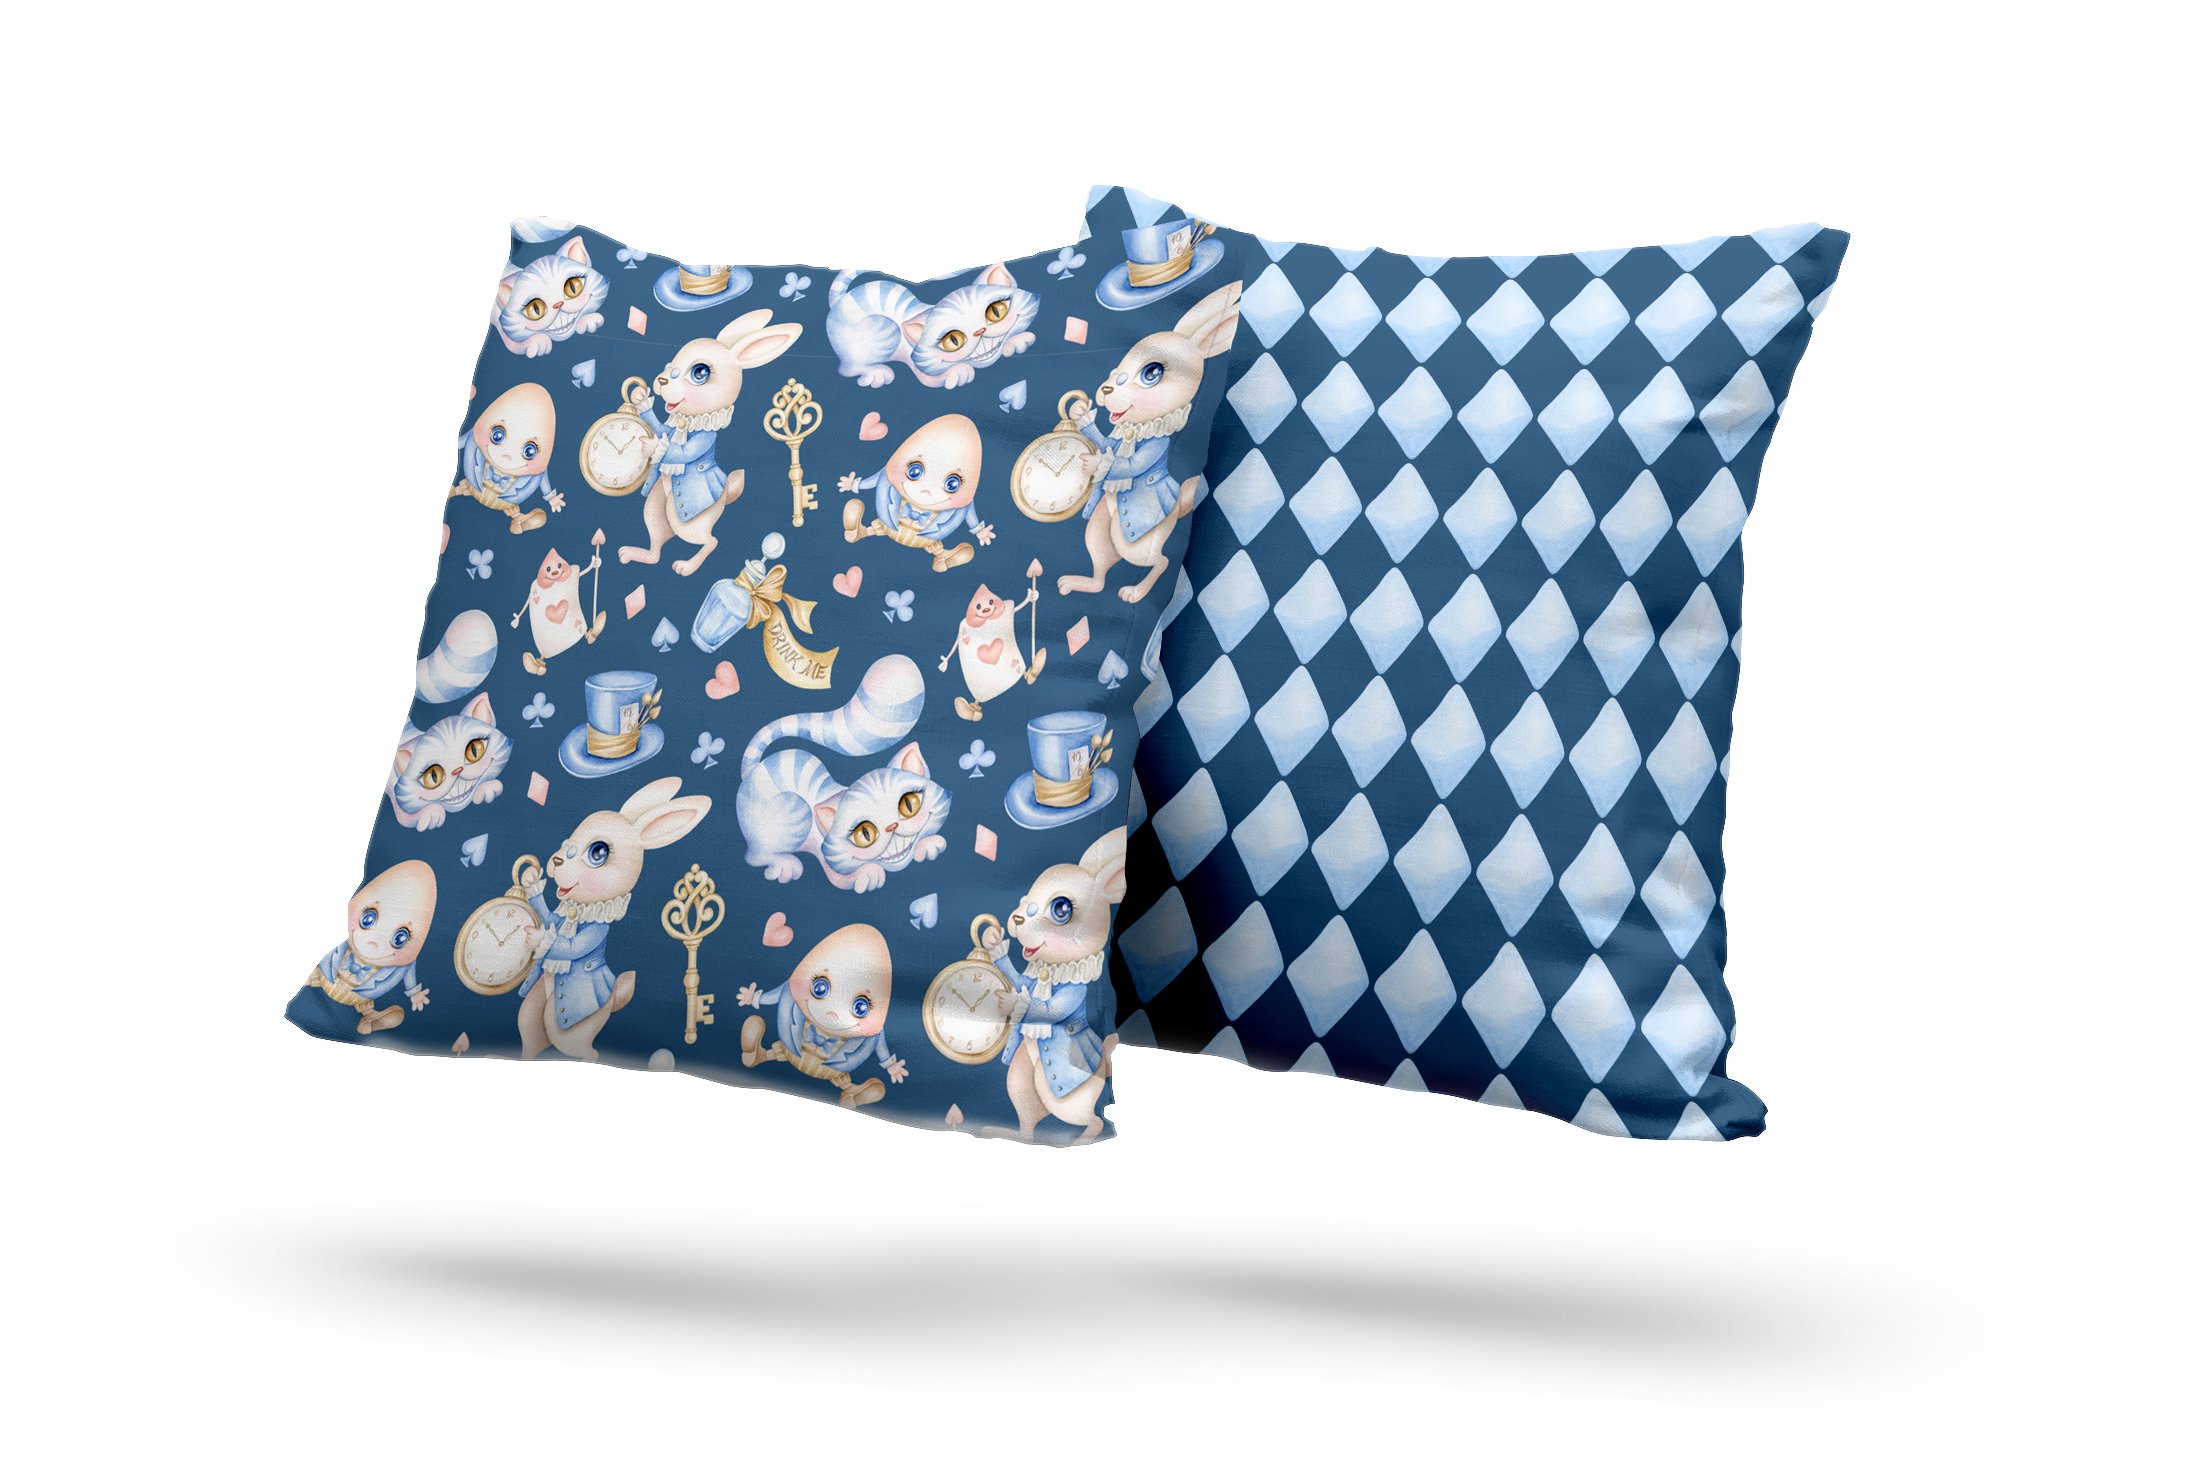 Pillow with blue color.